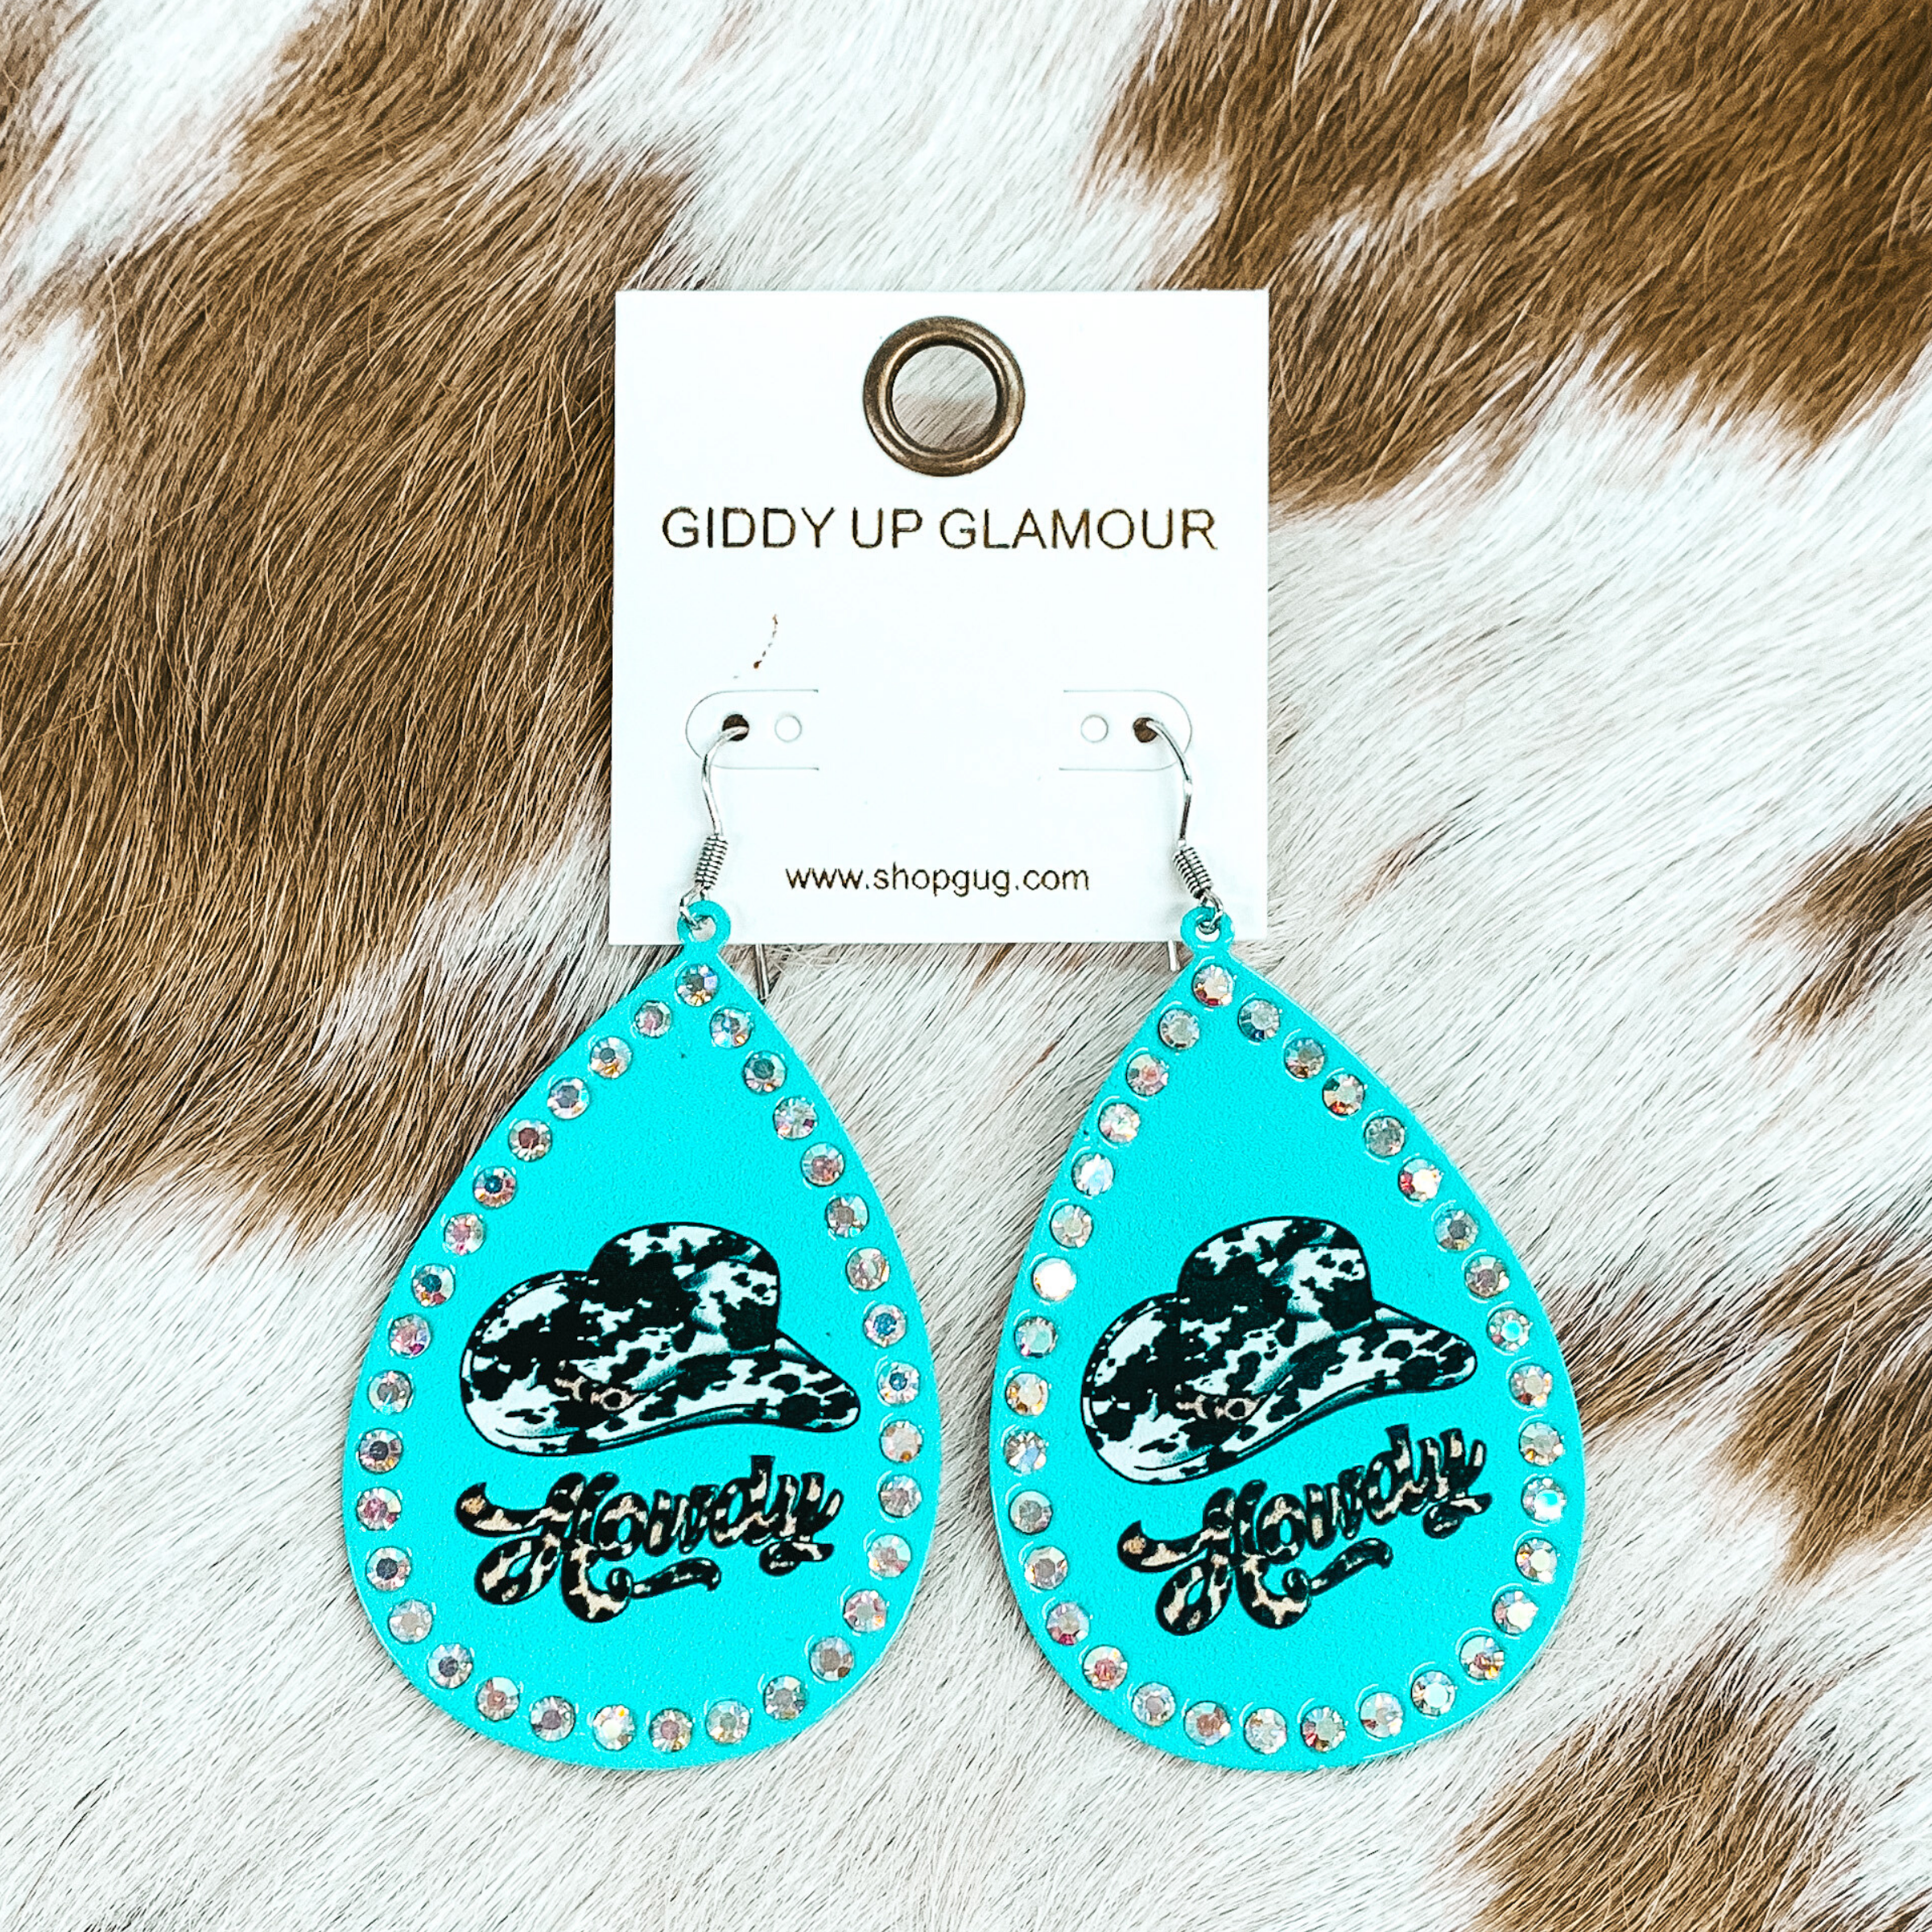 Light blue teardrop earrings with an AB crystal outline. In the center of the earrings, there is a black and white cow print cowboy hat with a leopard print band. There is also the word "Howdy in cursive underneath the cowboy hat in a leopard print. These earrings are pictured on a brown and white cow print hide material.